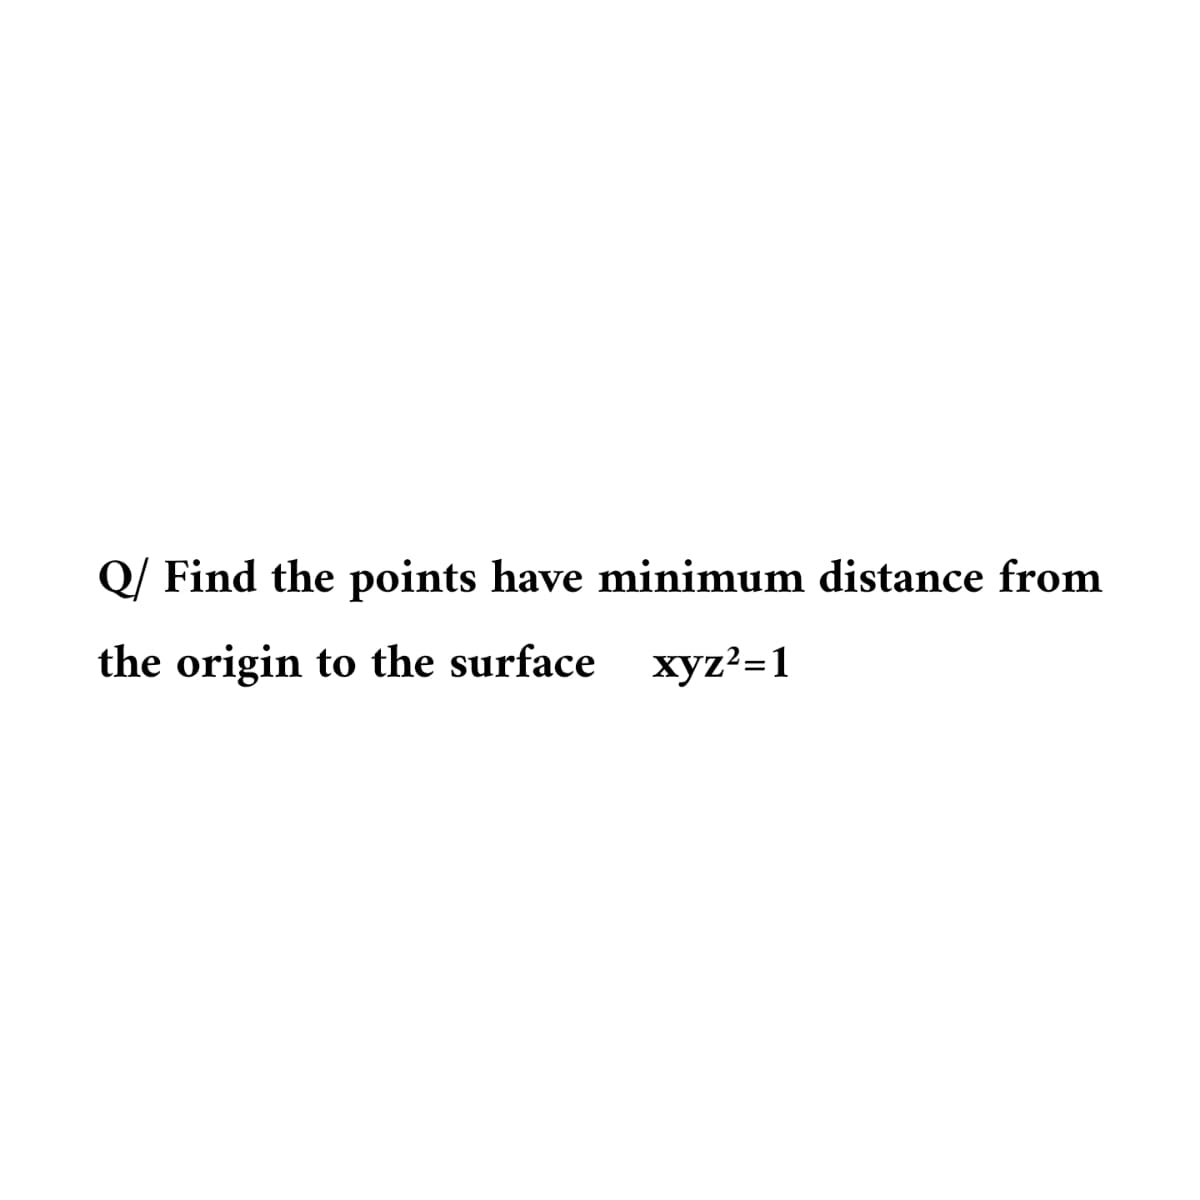 Q/ Find the points have minimum distance from
the origin to the surface
хуz?-1
